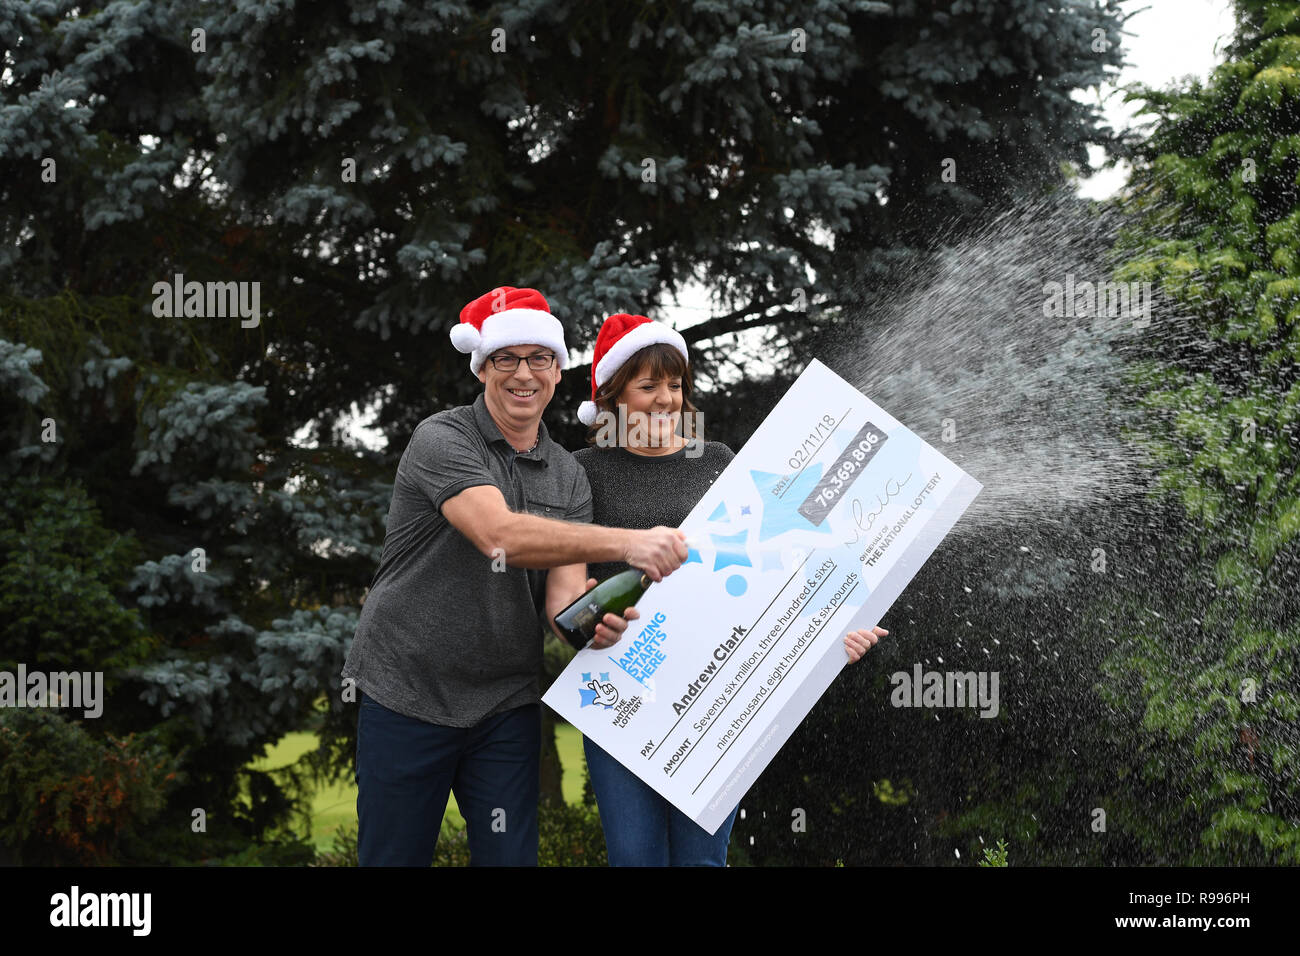 Andrew Clark, 51, from Boston, Lincolnshire, with his partner Trisha Fairhurst, celebrates his £76,369,806.80 EuroMillions jackpot win from the draw on Friday 2 November 2018 at Belton Woods Hotel, Grantham. Stock Photo